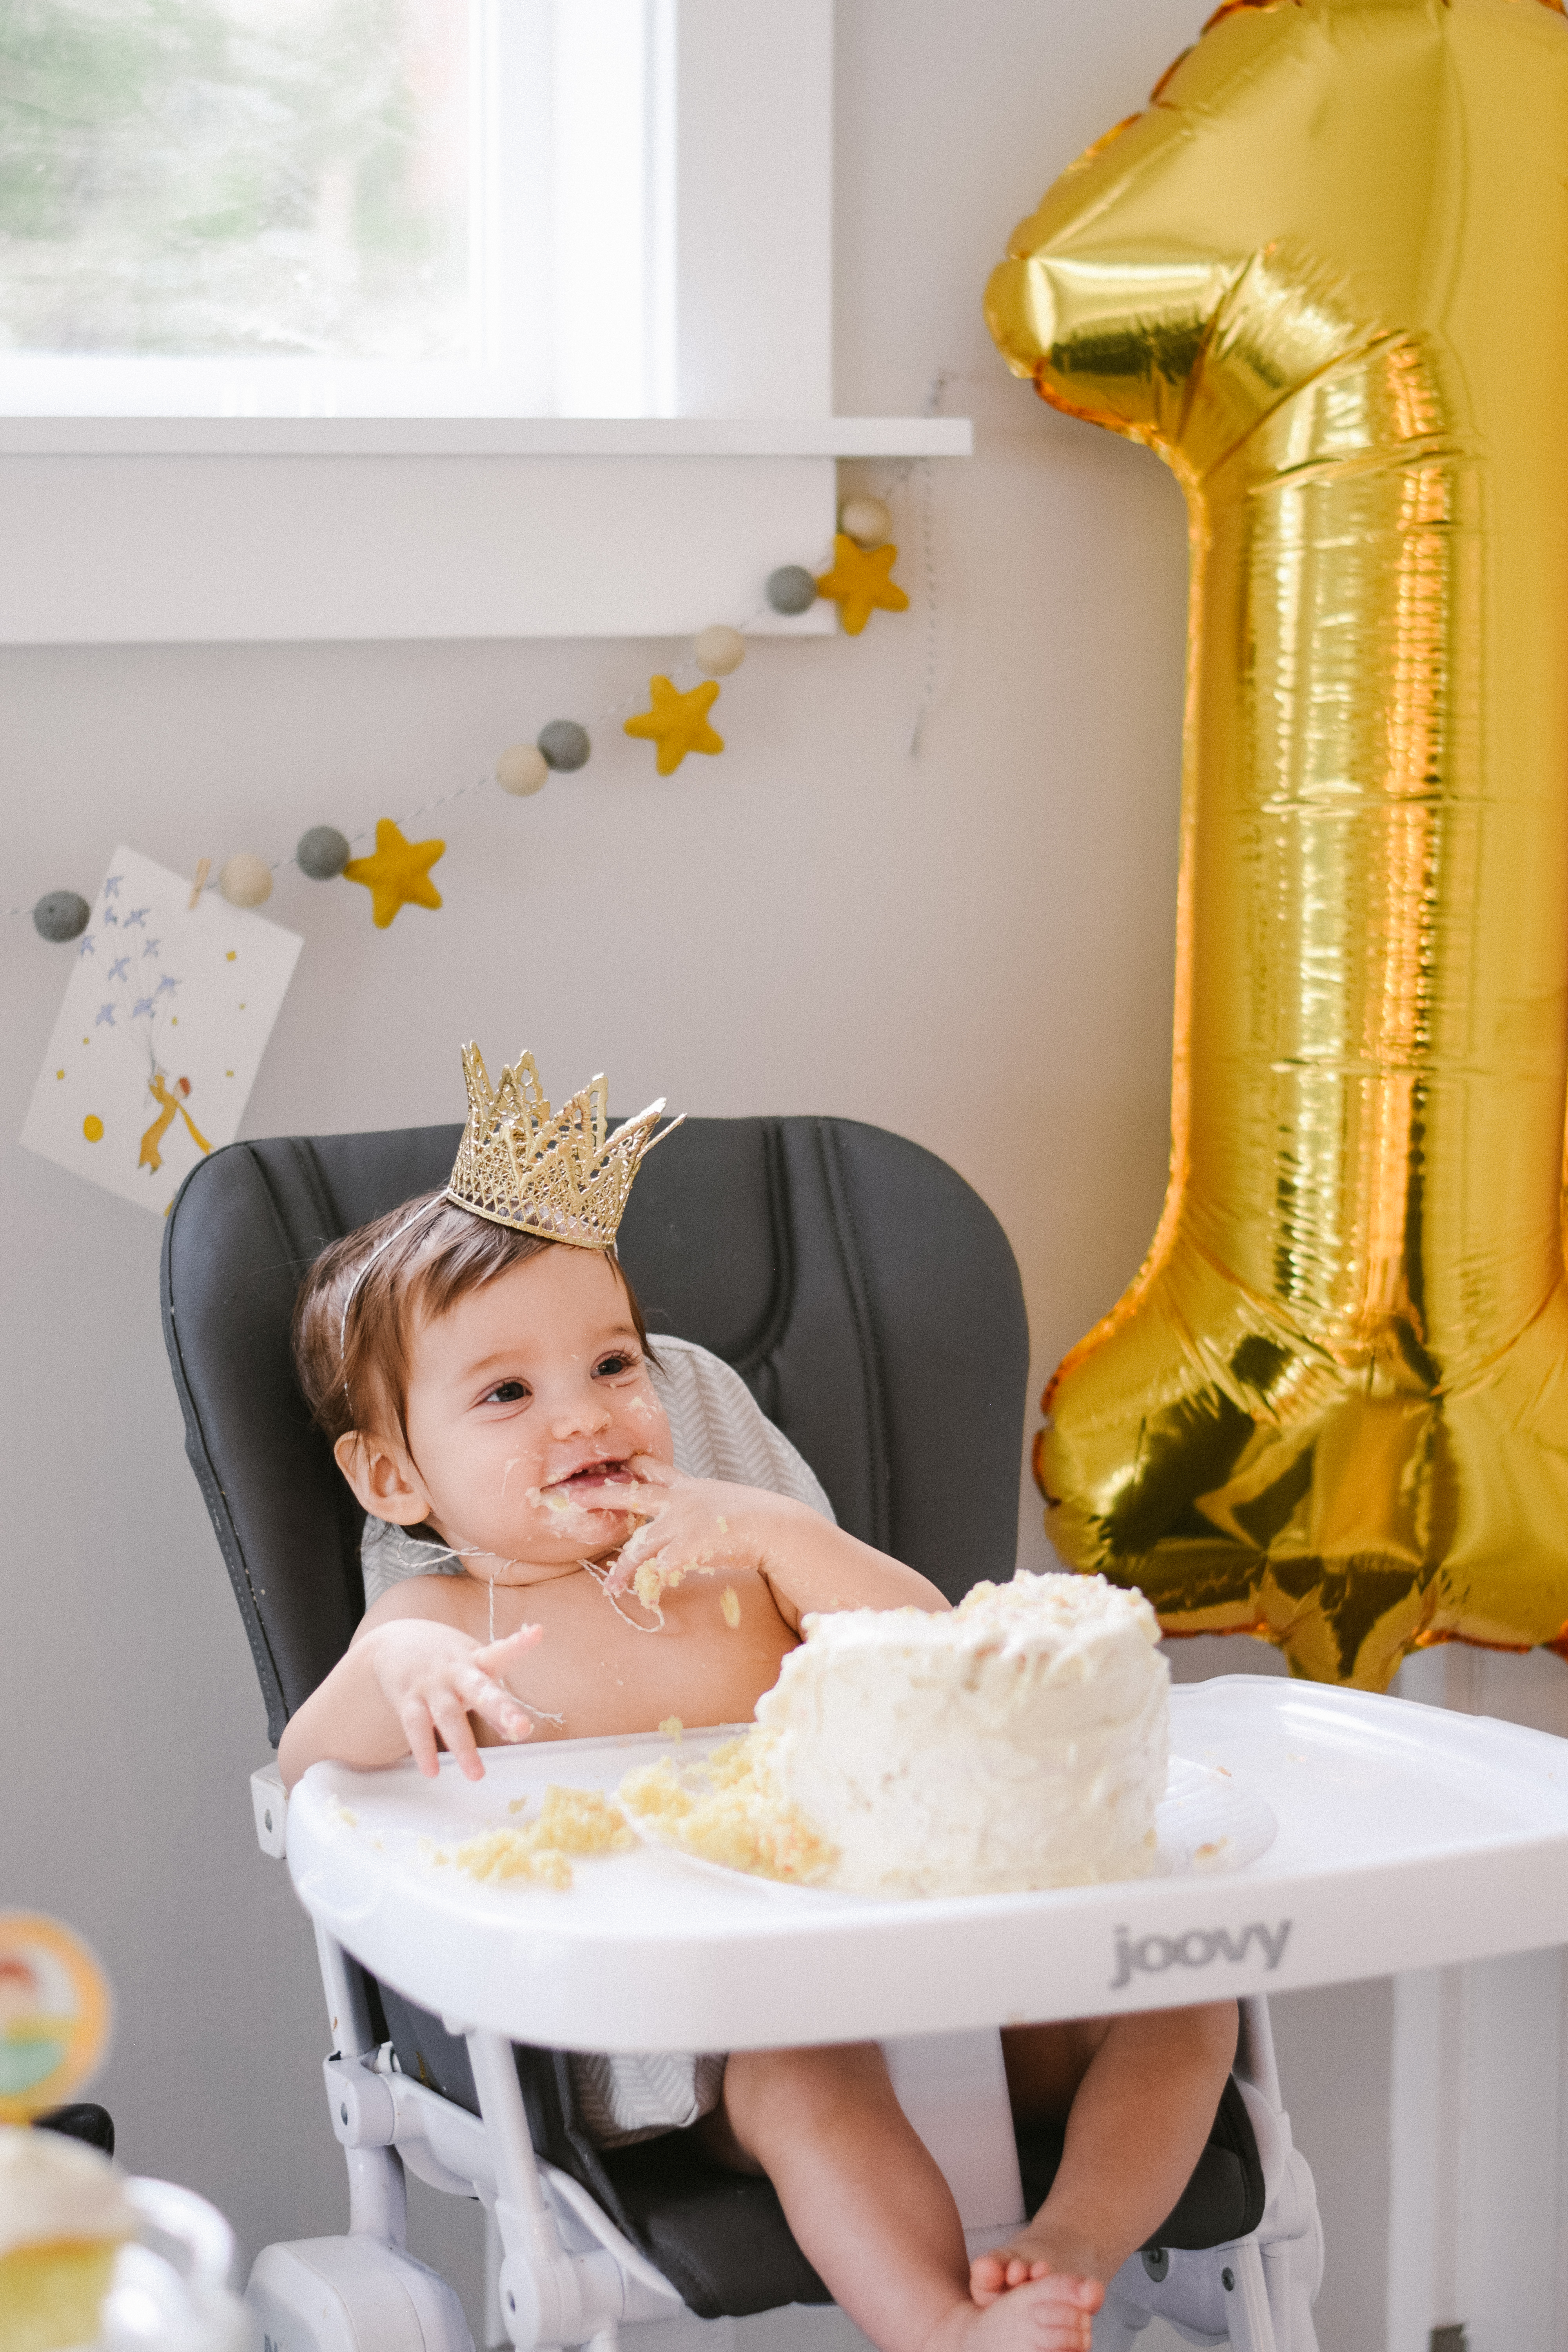 Our Little Prince is One!